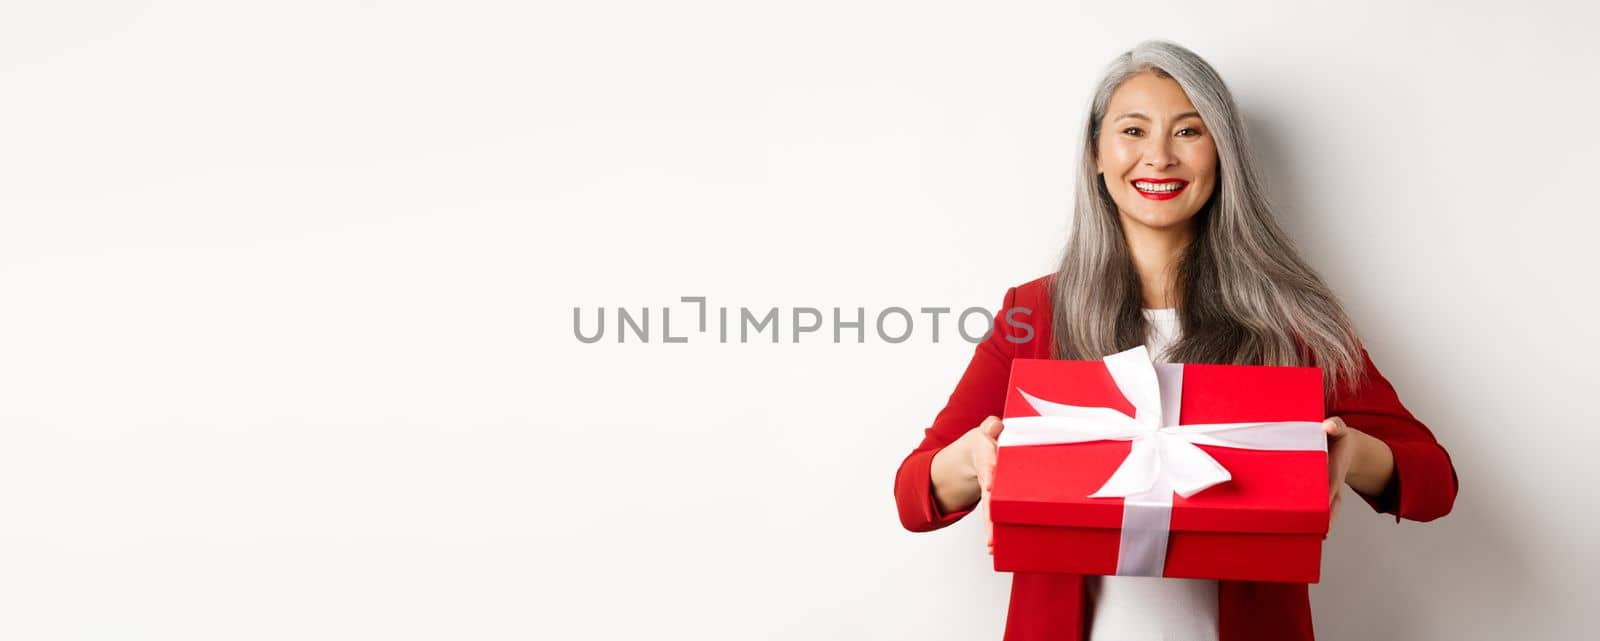 Elegant senior woman giving you present. Asian lady holding red gift box and smiling, standing over white background.